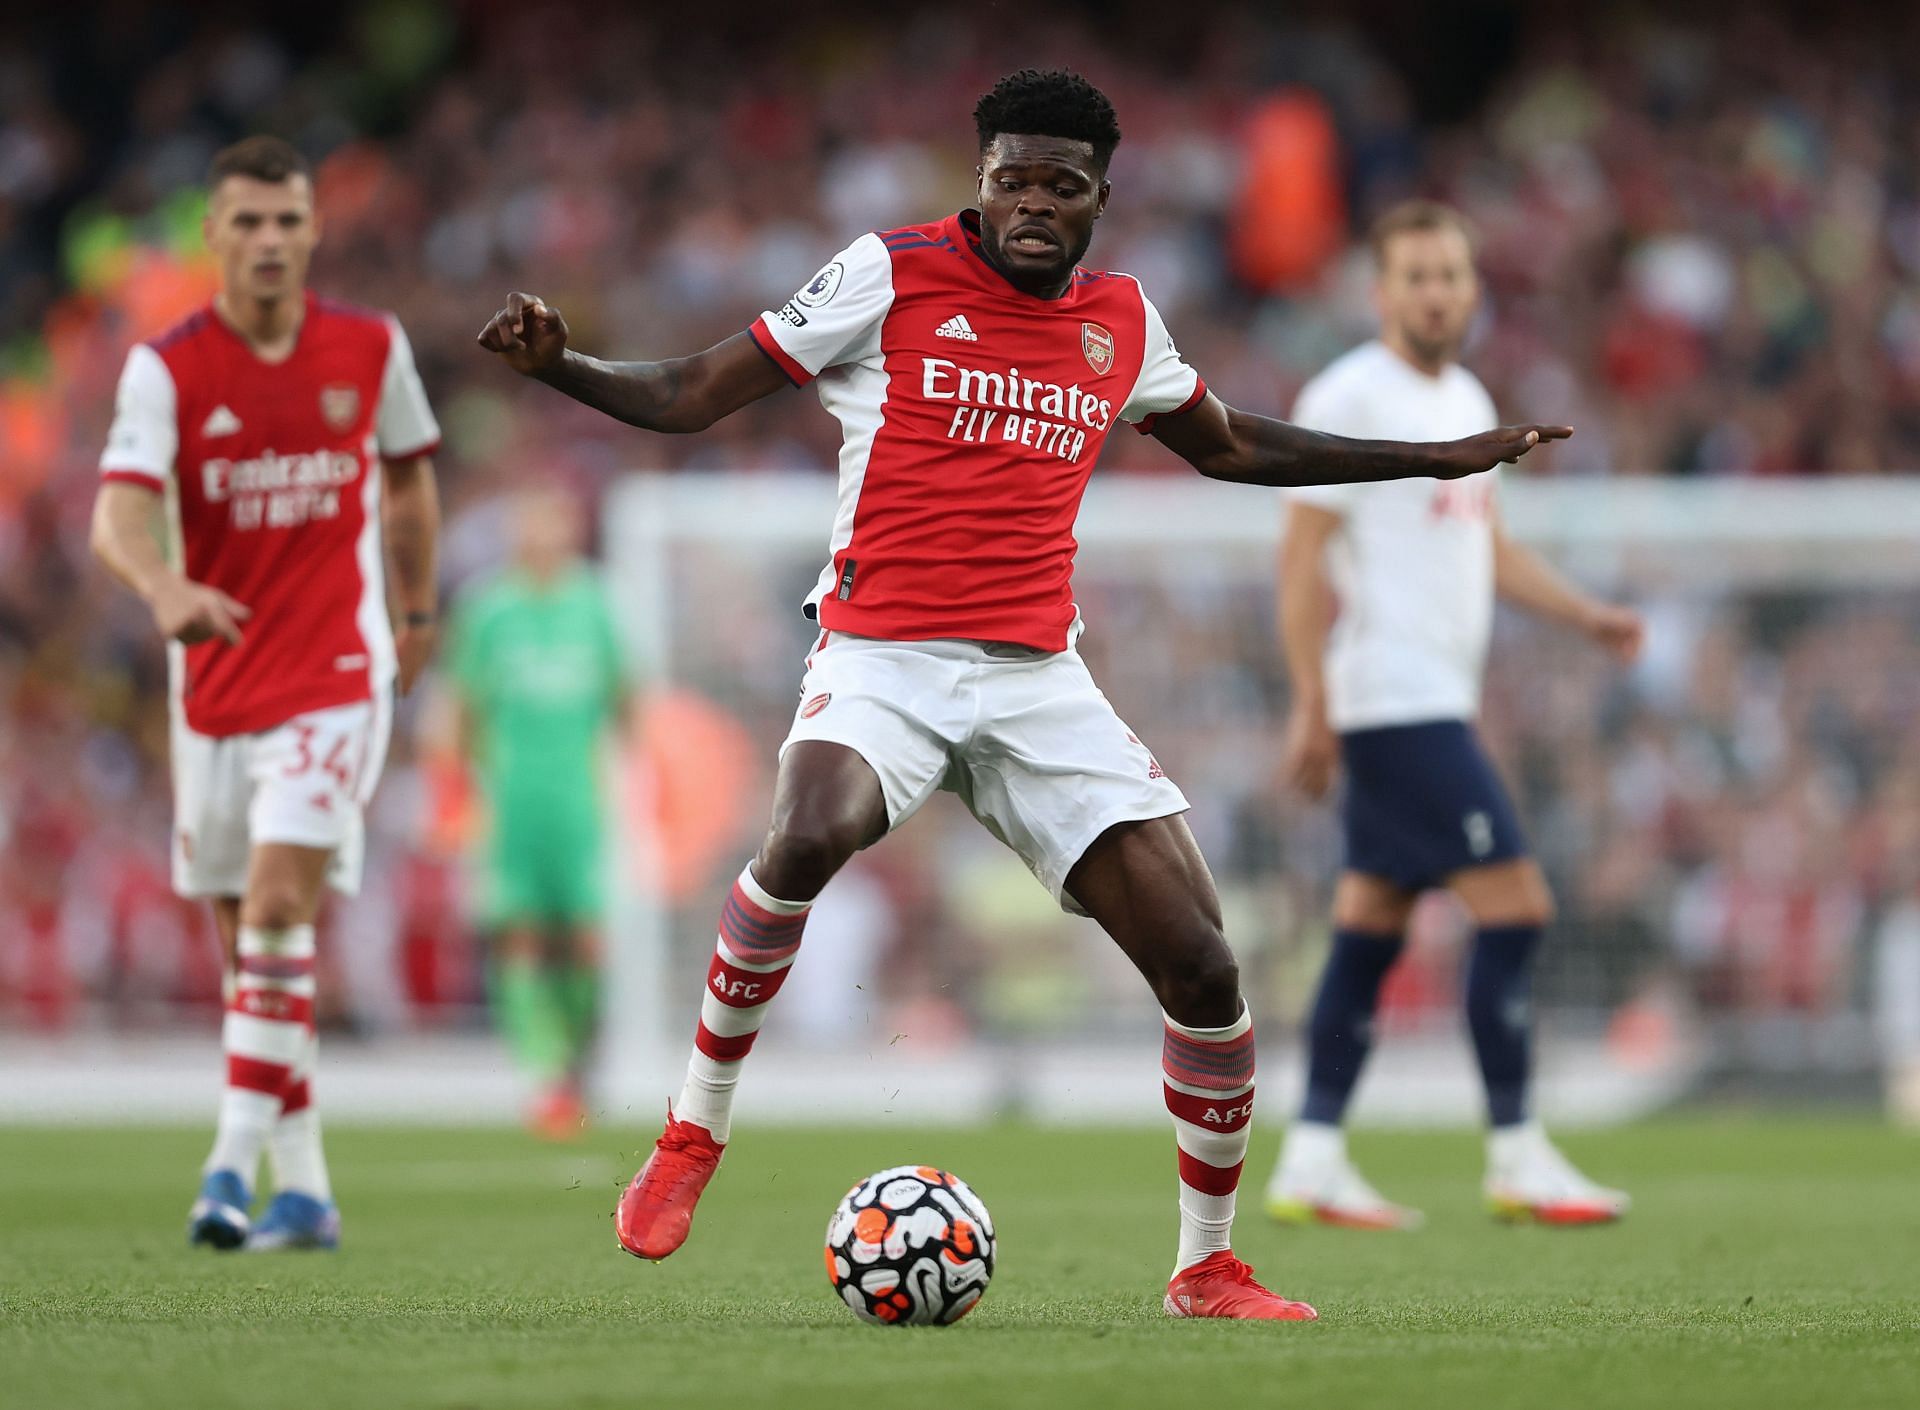 Thomas Partey has expressed his delight after scoring his first goal for Arsenal.